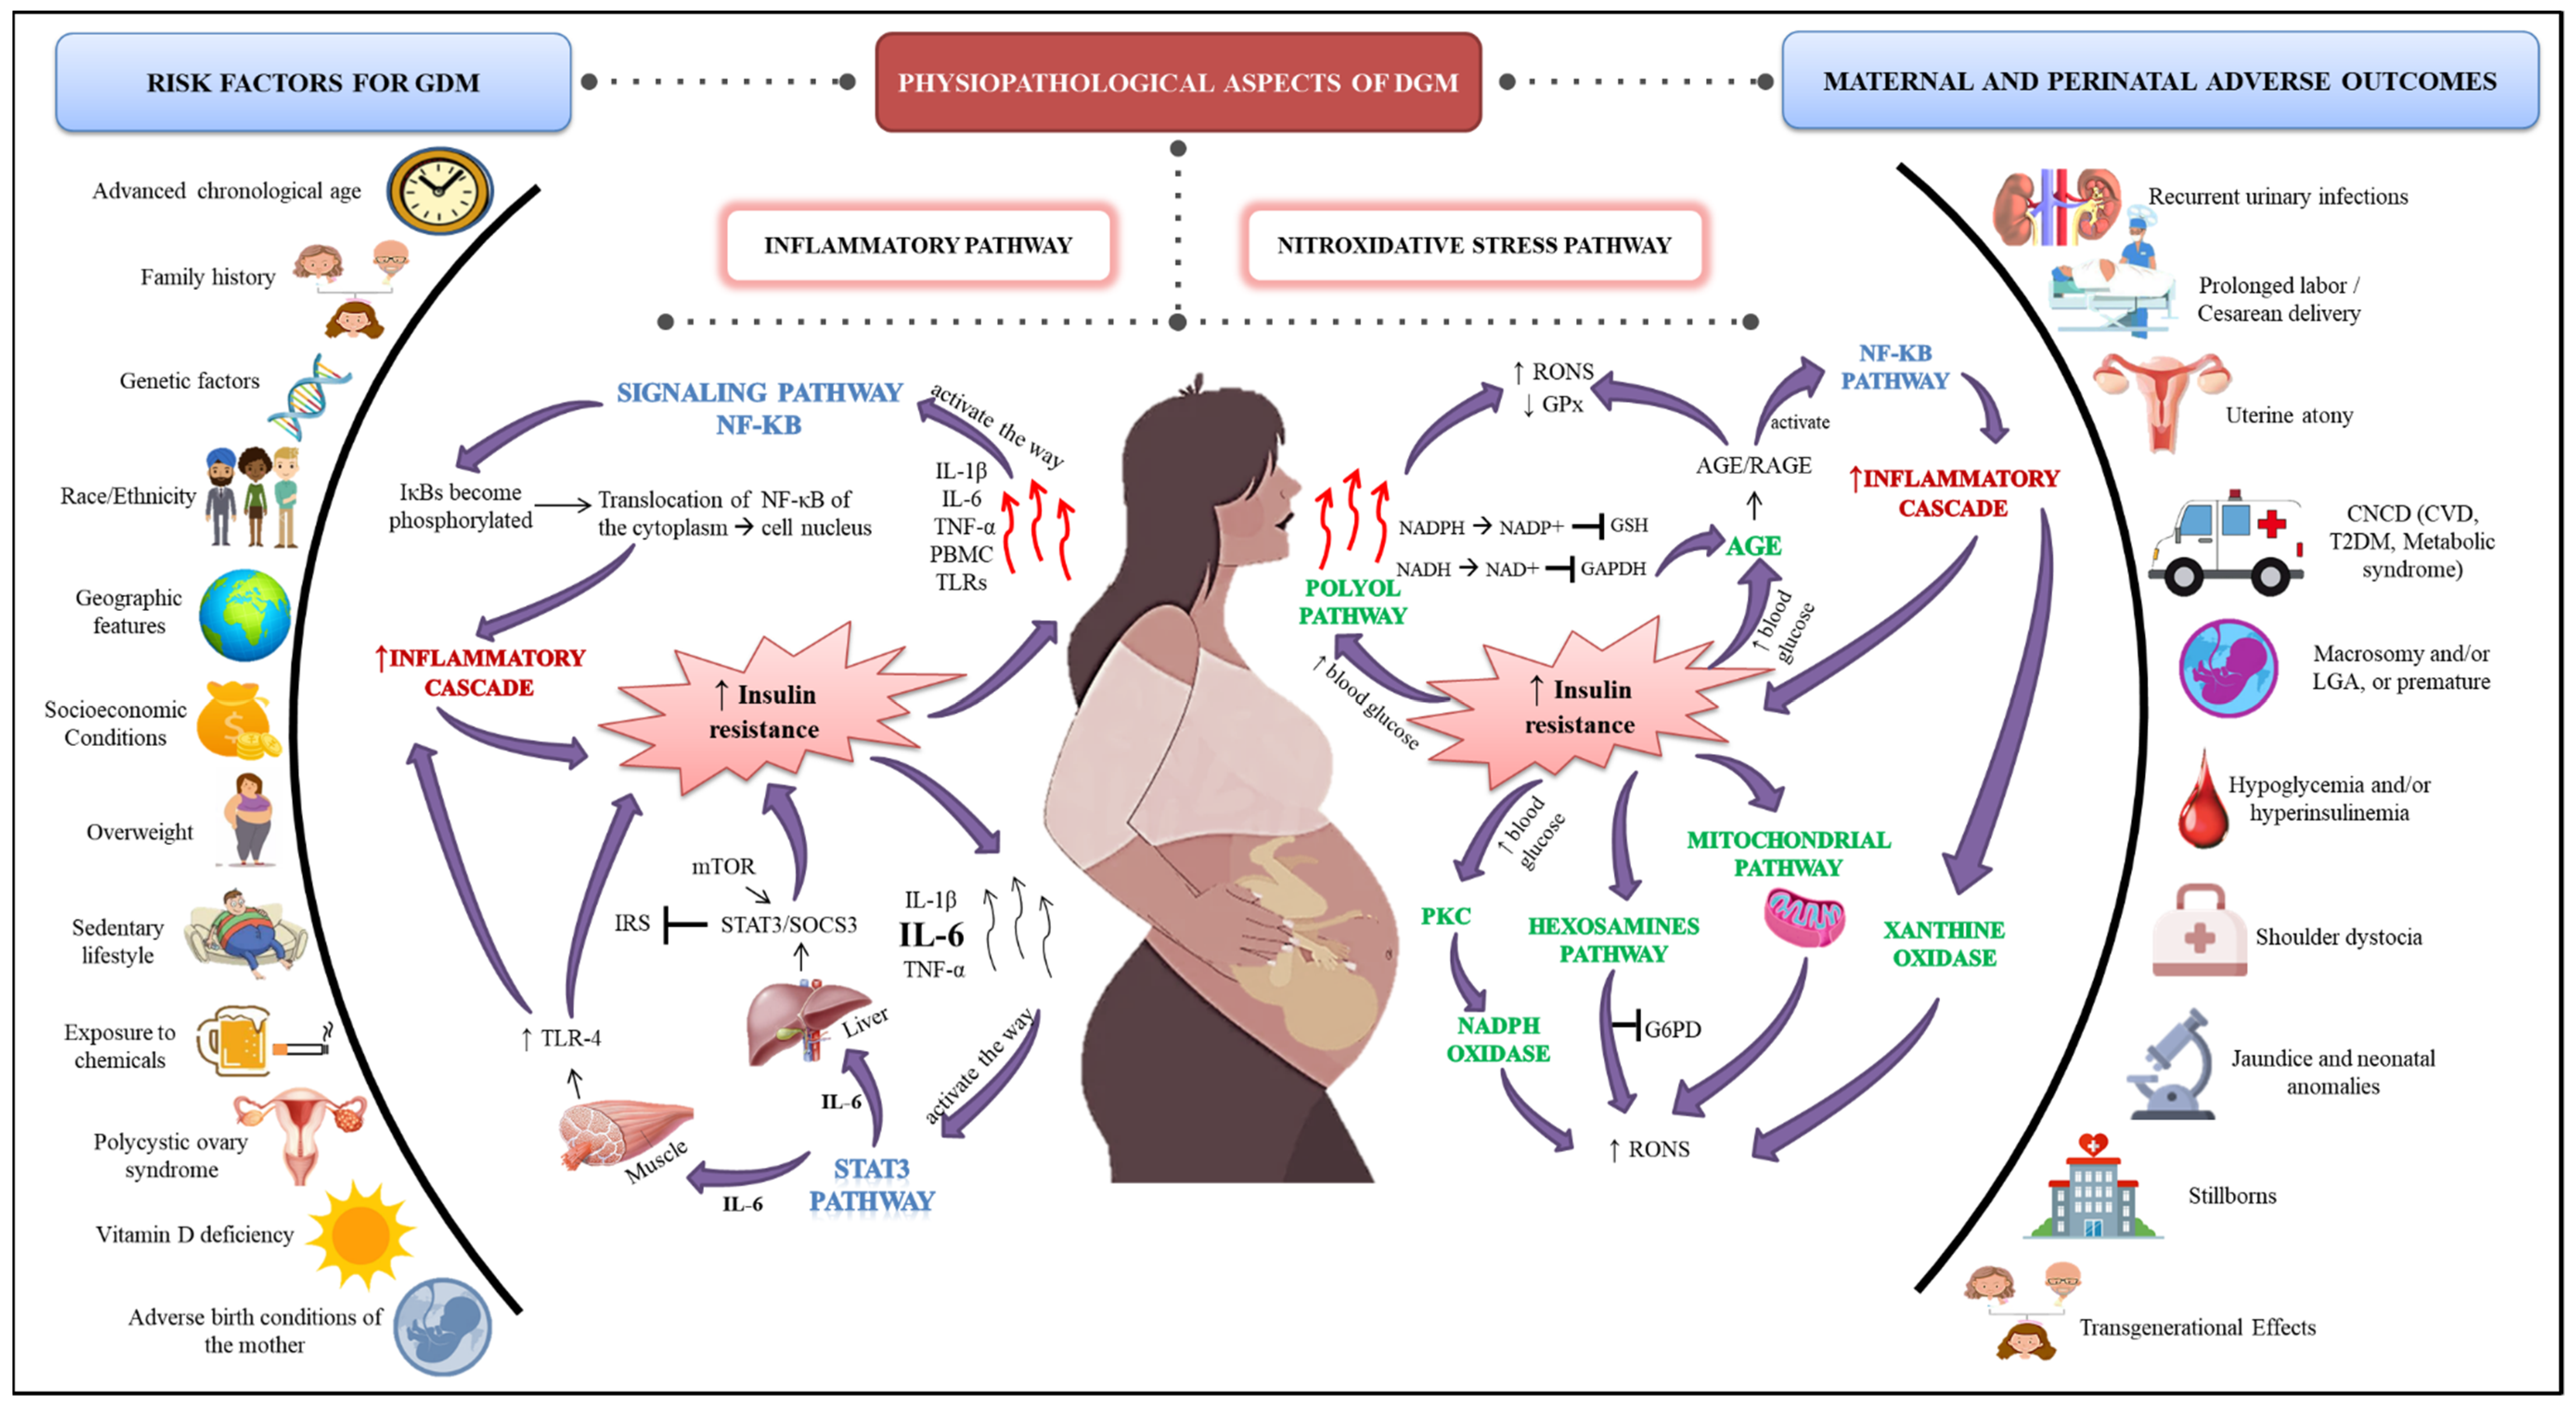 Free radicals and pregnancy complications